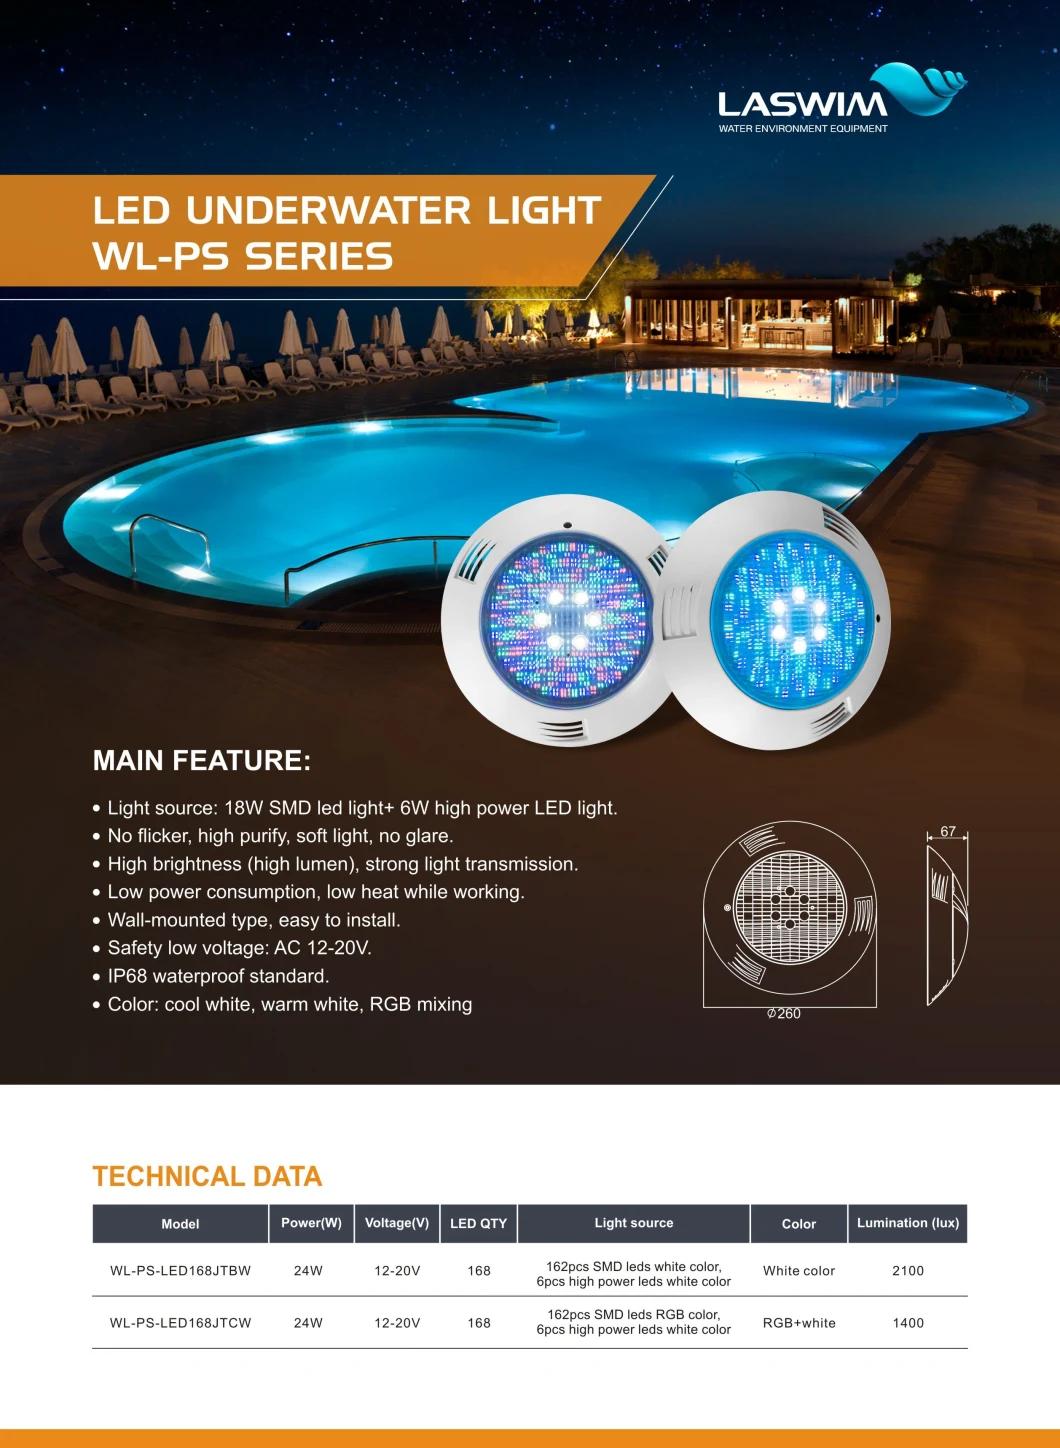 Good Service Made in China Plastic Shell Pool Light